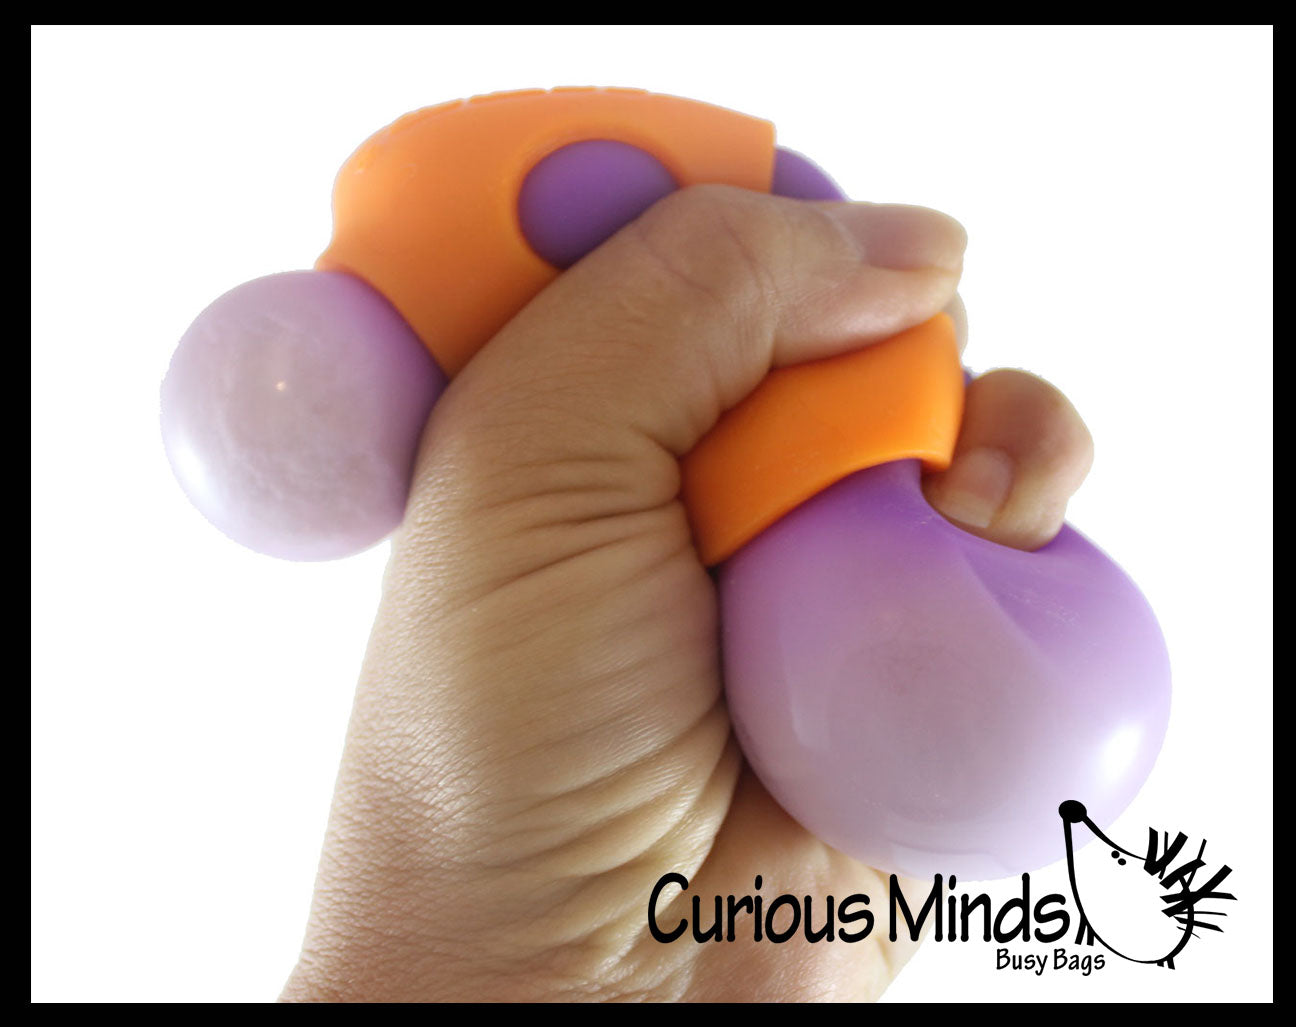 Nee-Doh Mushroom - Groovy Shroom Soft Doh Filled Stretch Ball with Mesh Web - Ultra Squishy and Moldable Relaxing Sensory Fidget Stress Toy